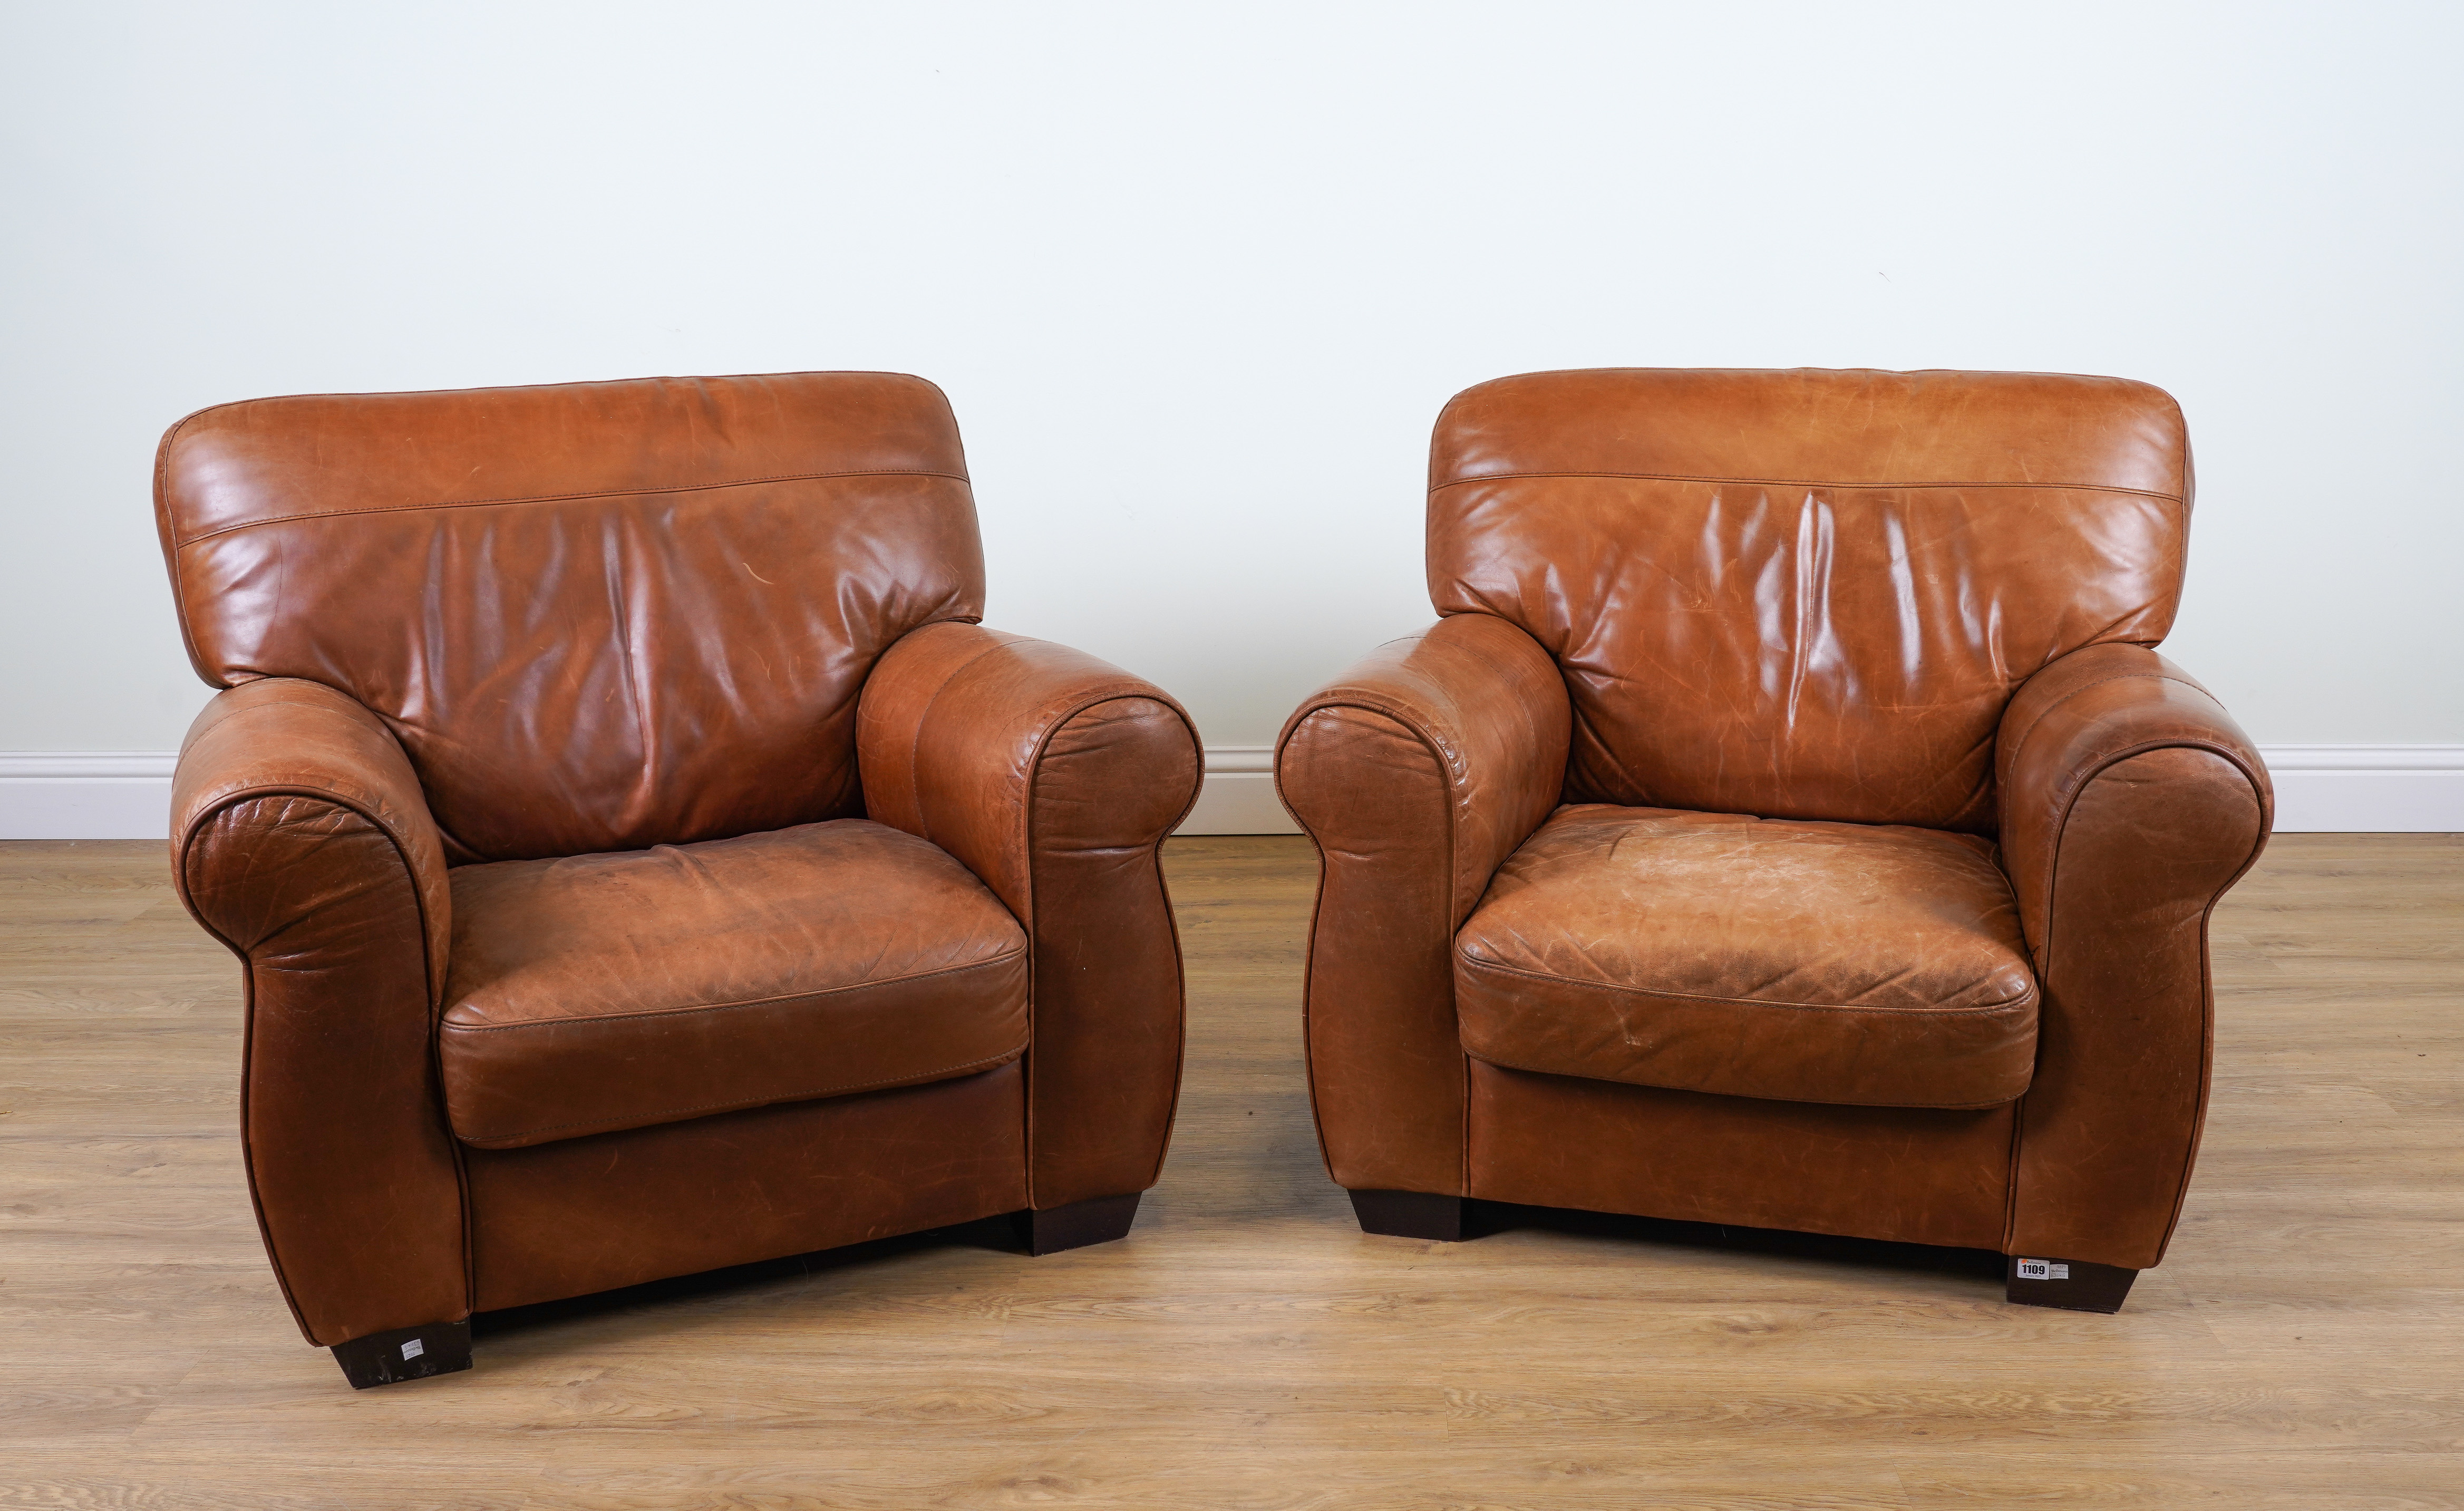 A PAIR OF 20TH CENTURY TAN LEATHER